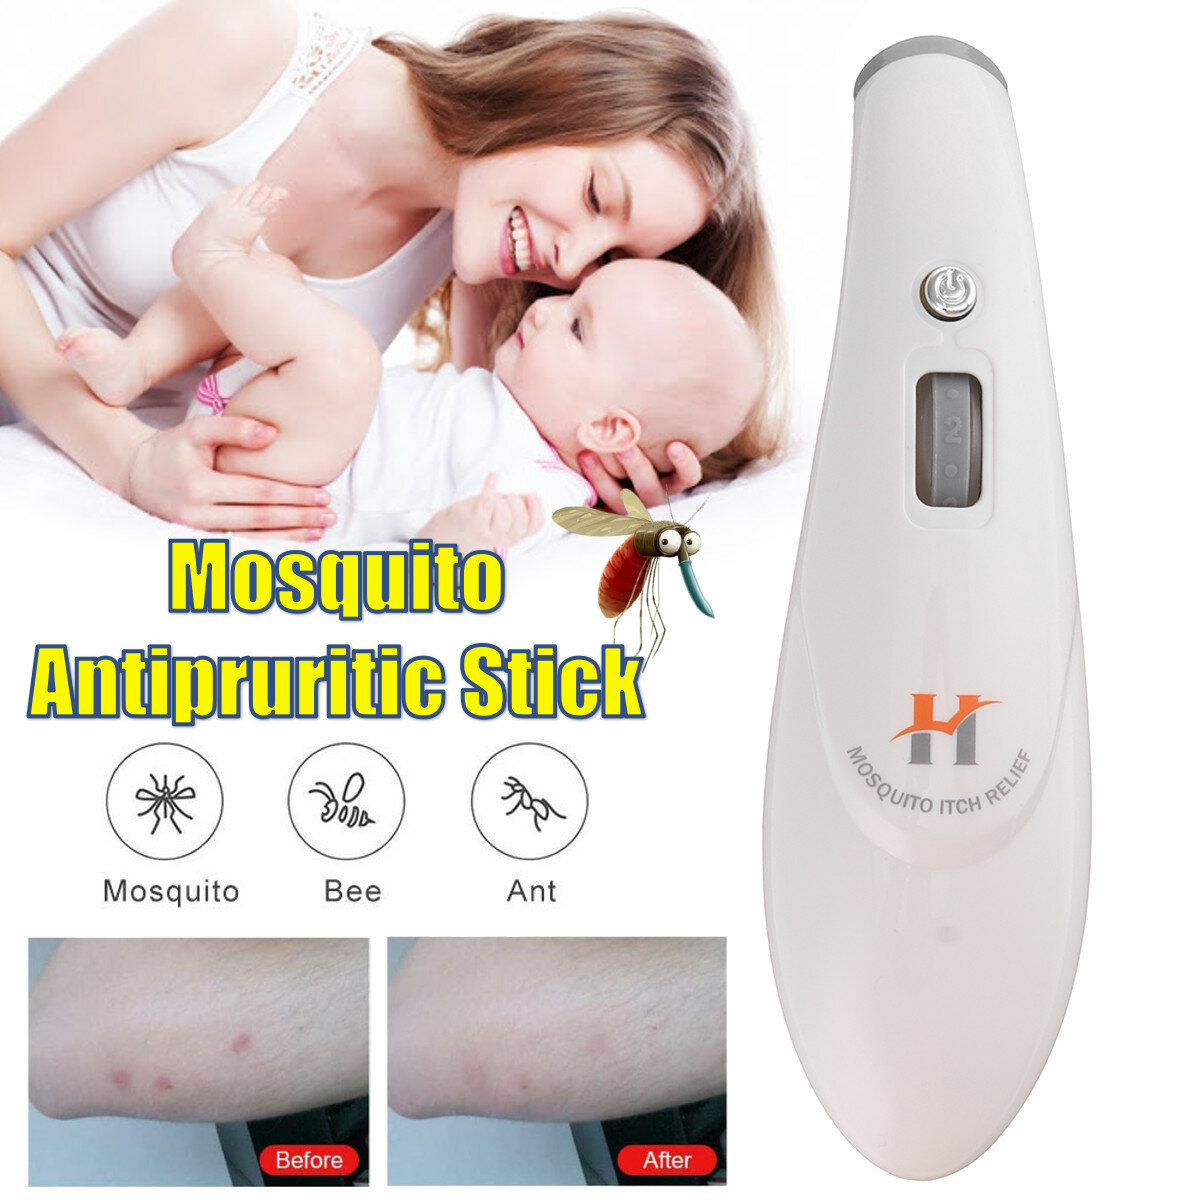 

Potable Electronic Bug Bite Itching Pen Soothing Swelling Antipruritic Stick Mosquito Relief Device Insect for Children